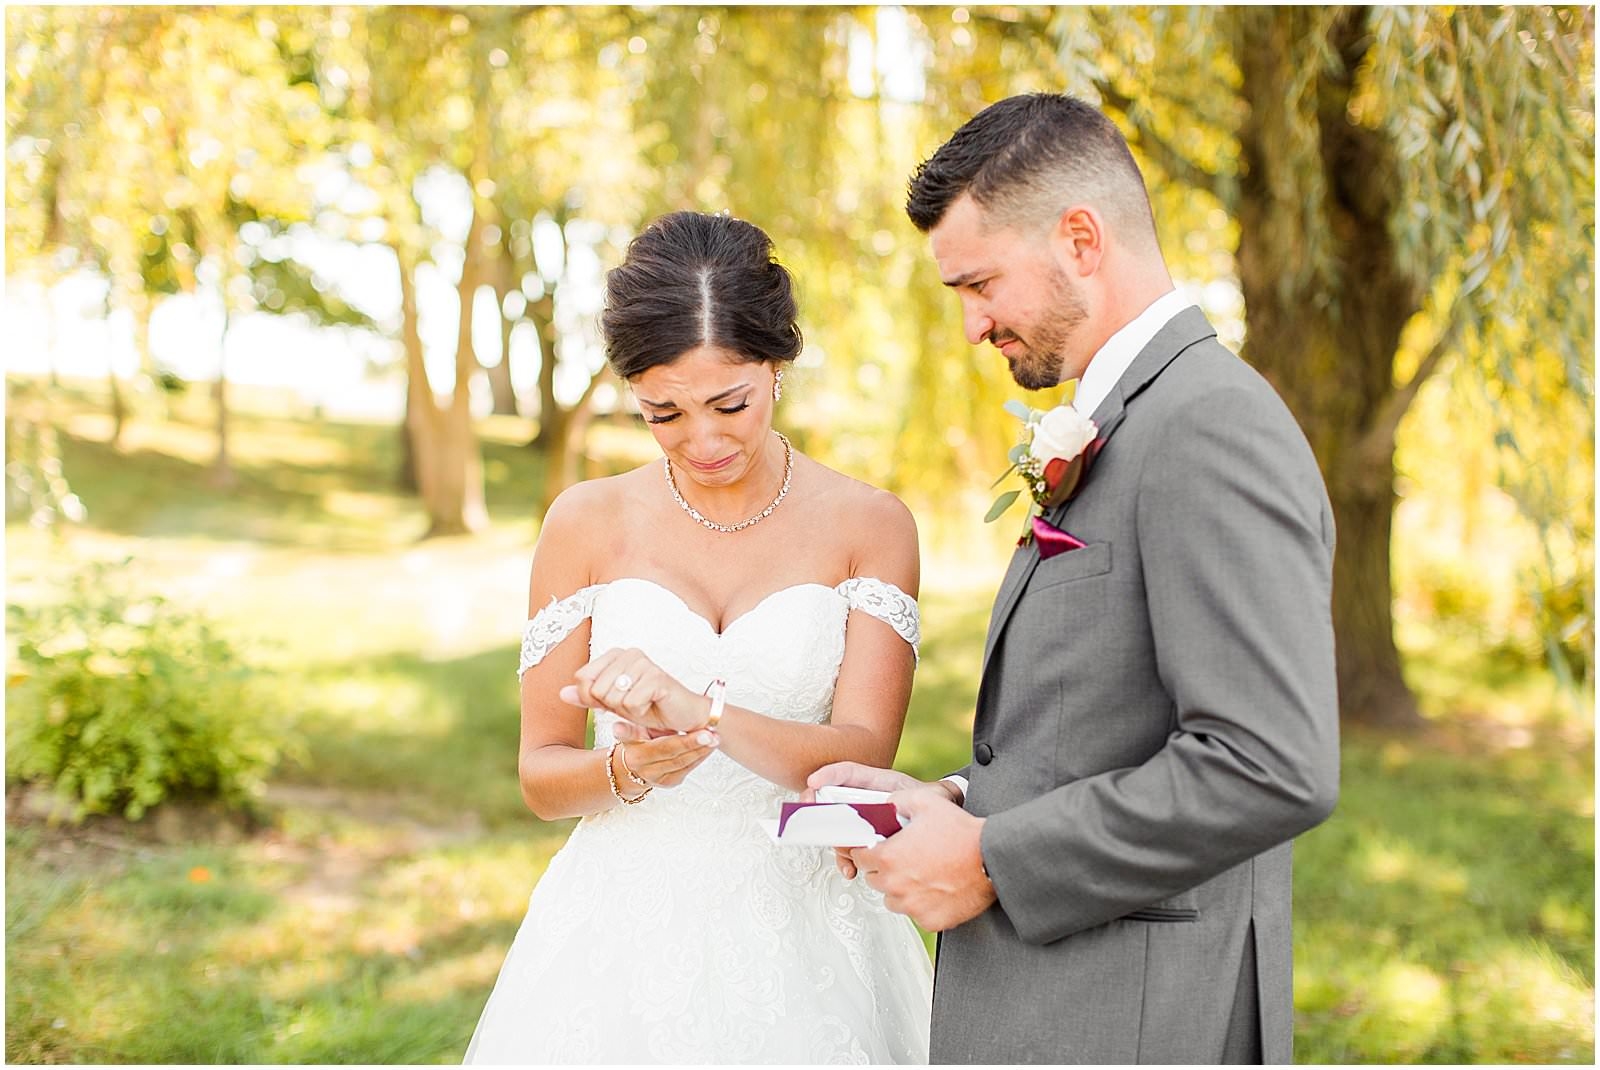 A Stunning Fall Wedding in Indianapolis, IN |. Sally and Andrew | Bret and Brandie Photography 0054.jpg